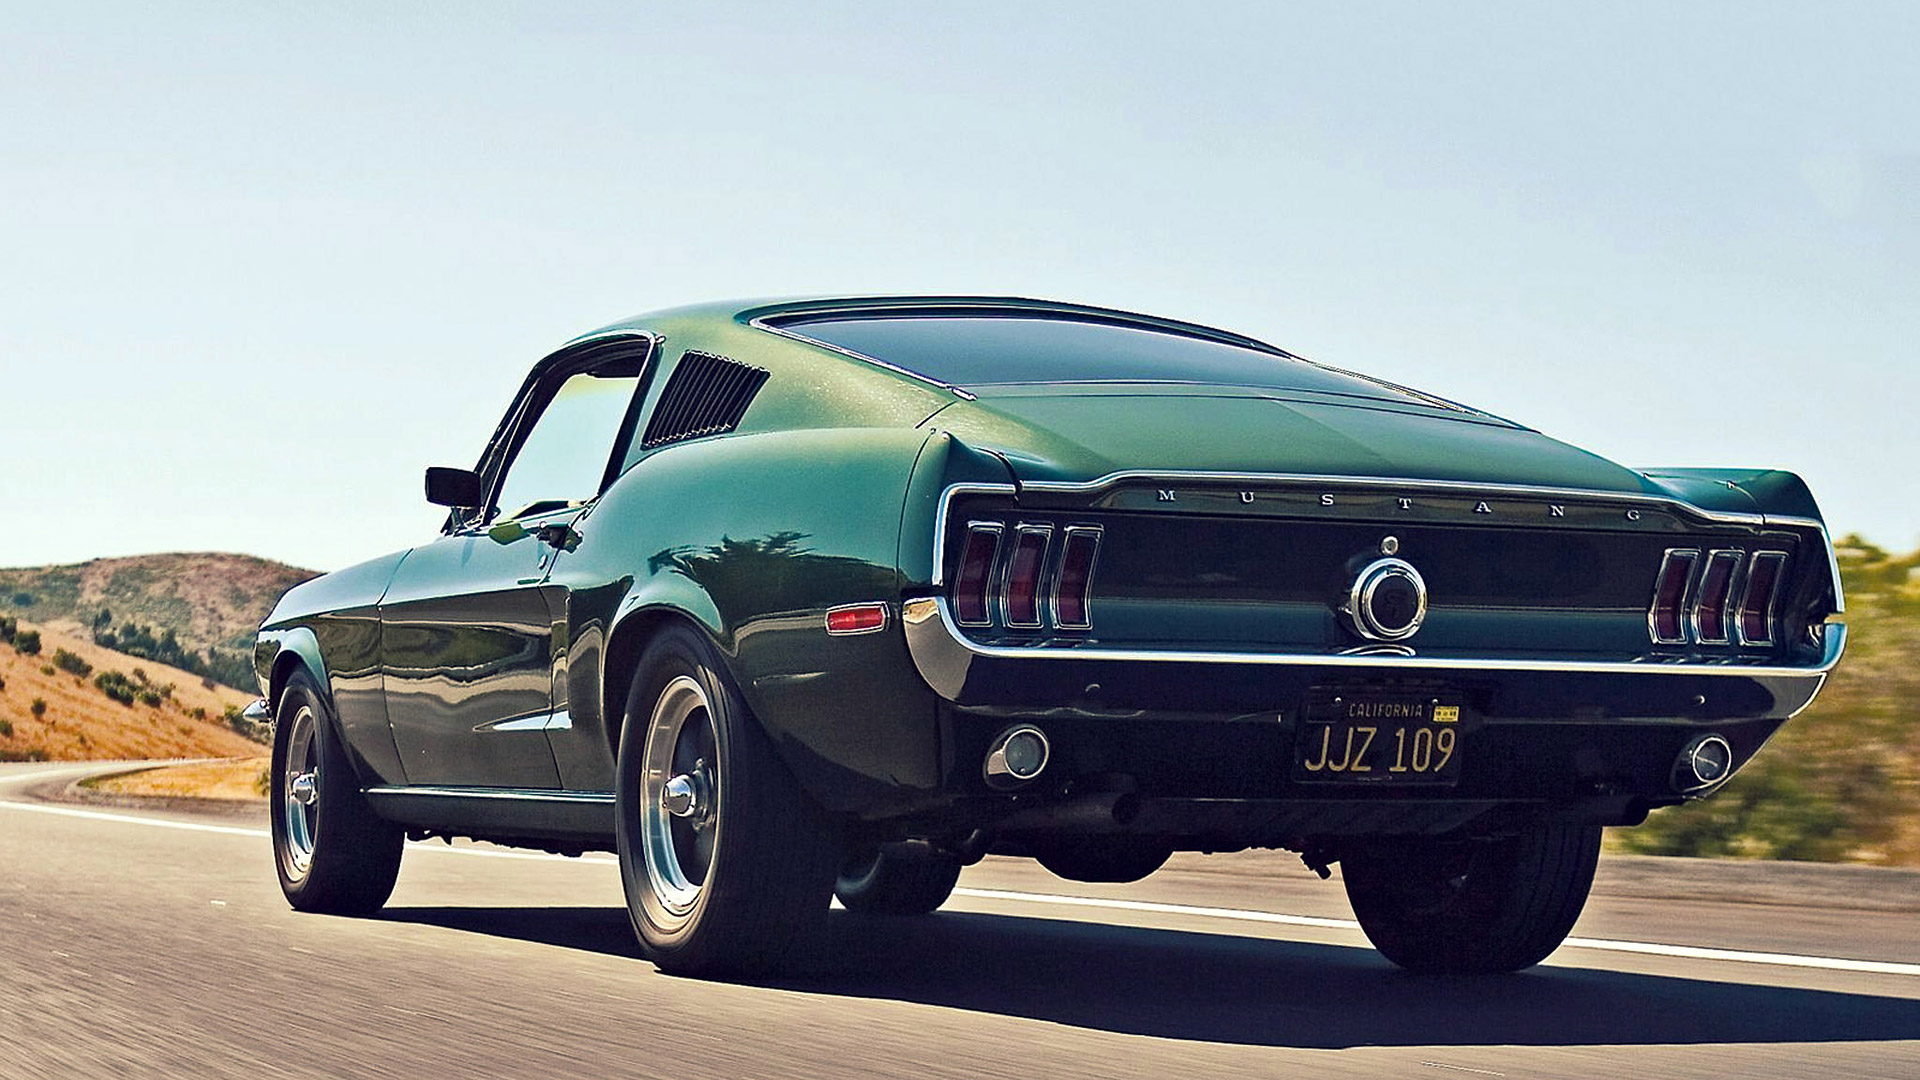 1968 Ford Mustang Backgrounds, Compatible - PC, Mobile, Gadgets| 1920x1080 px